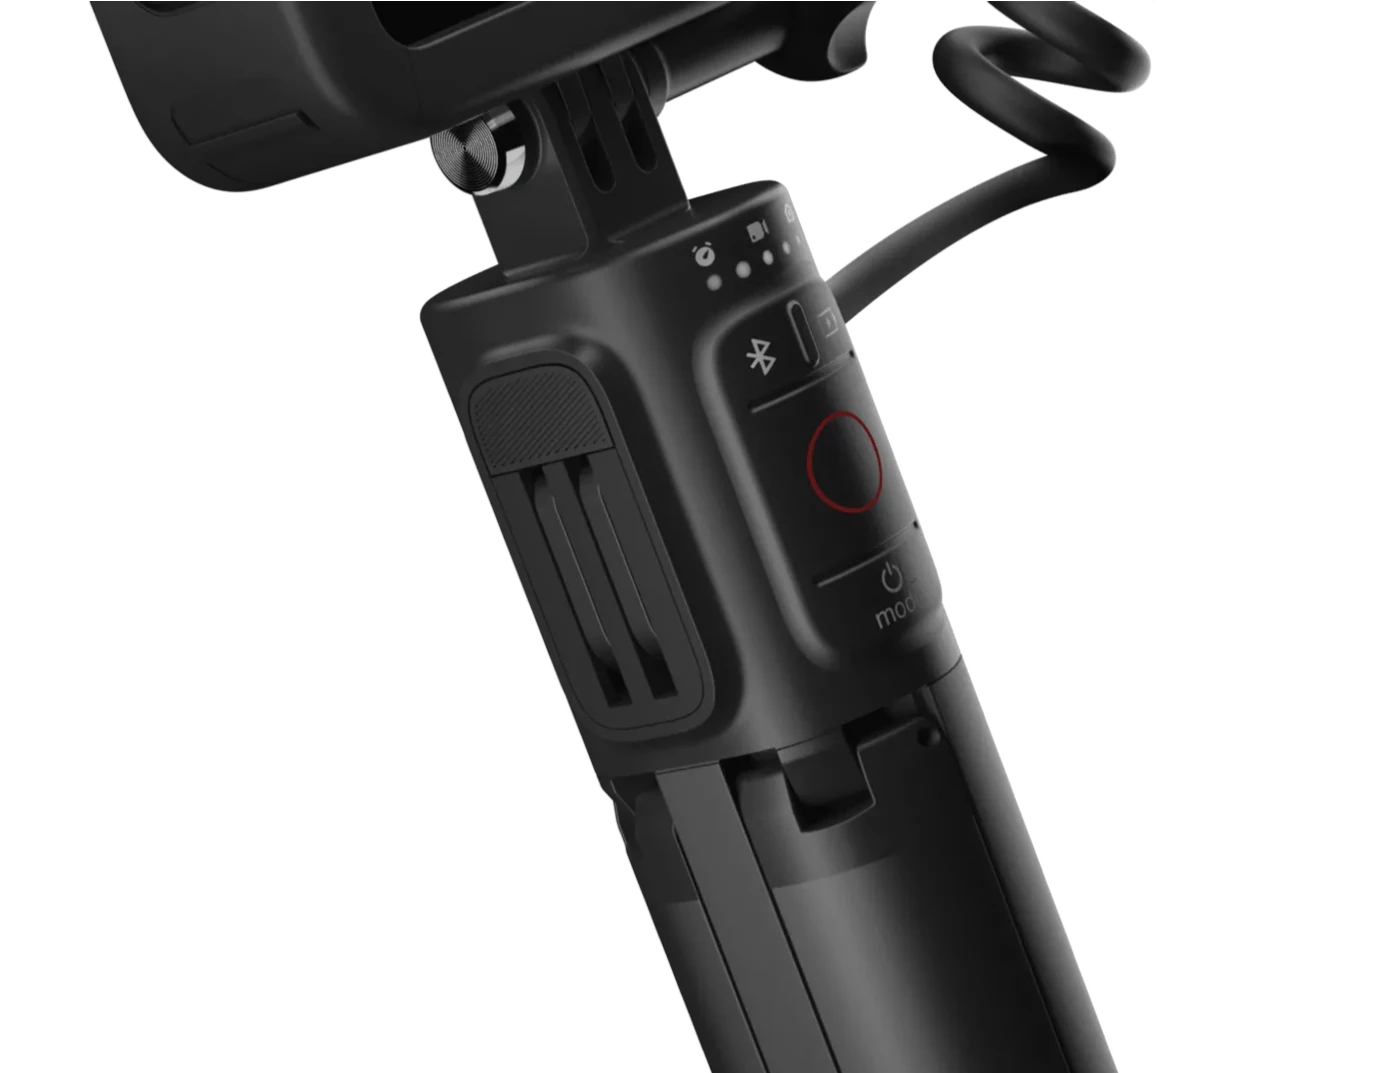 Close up of the GoPro tripod and remote